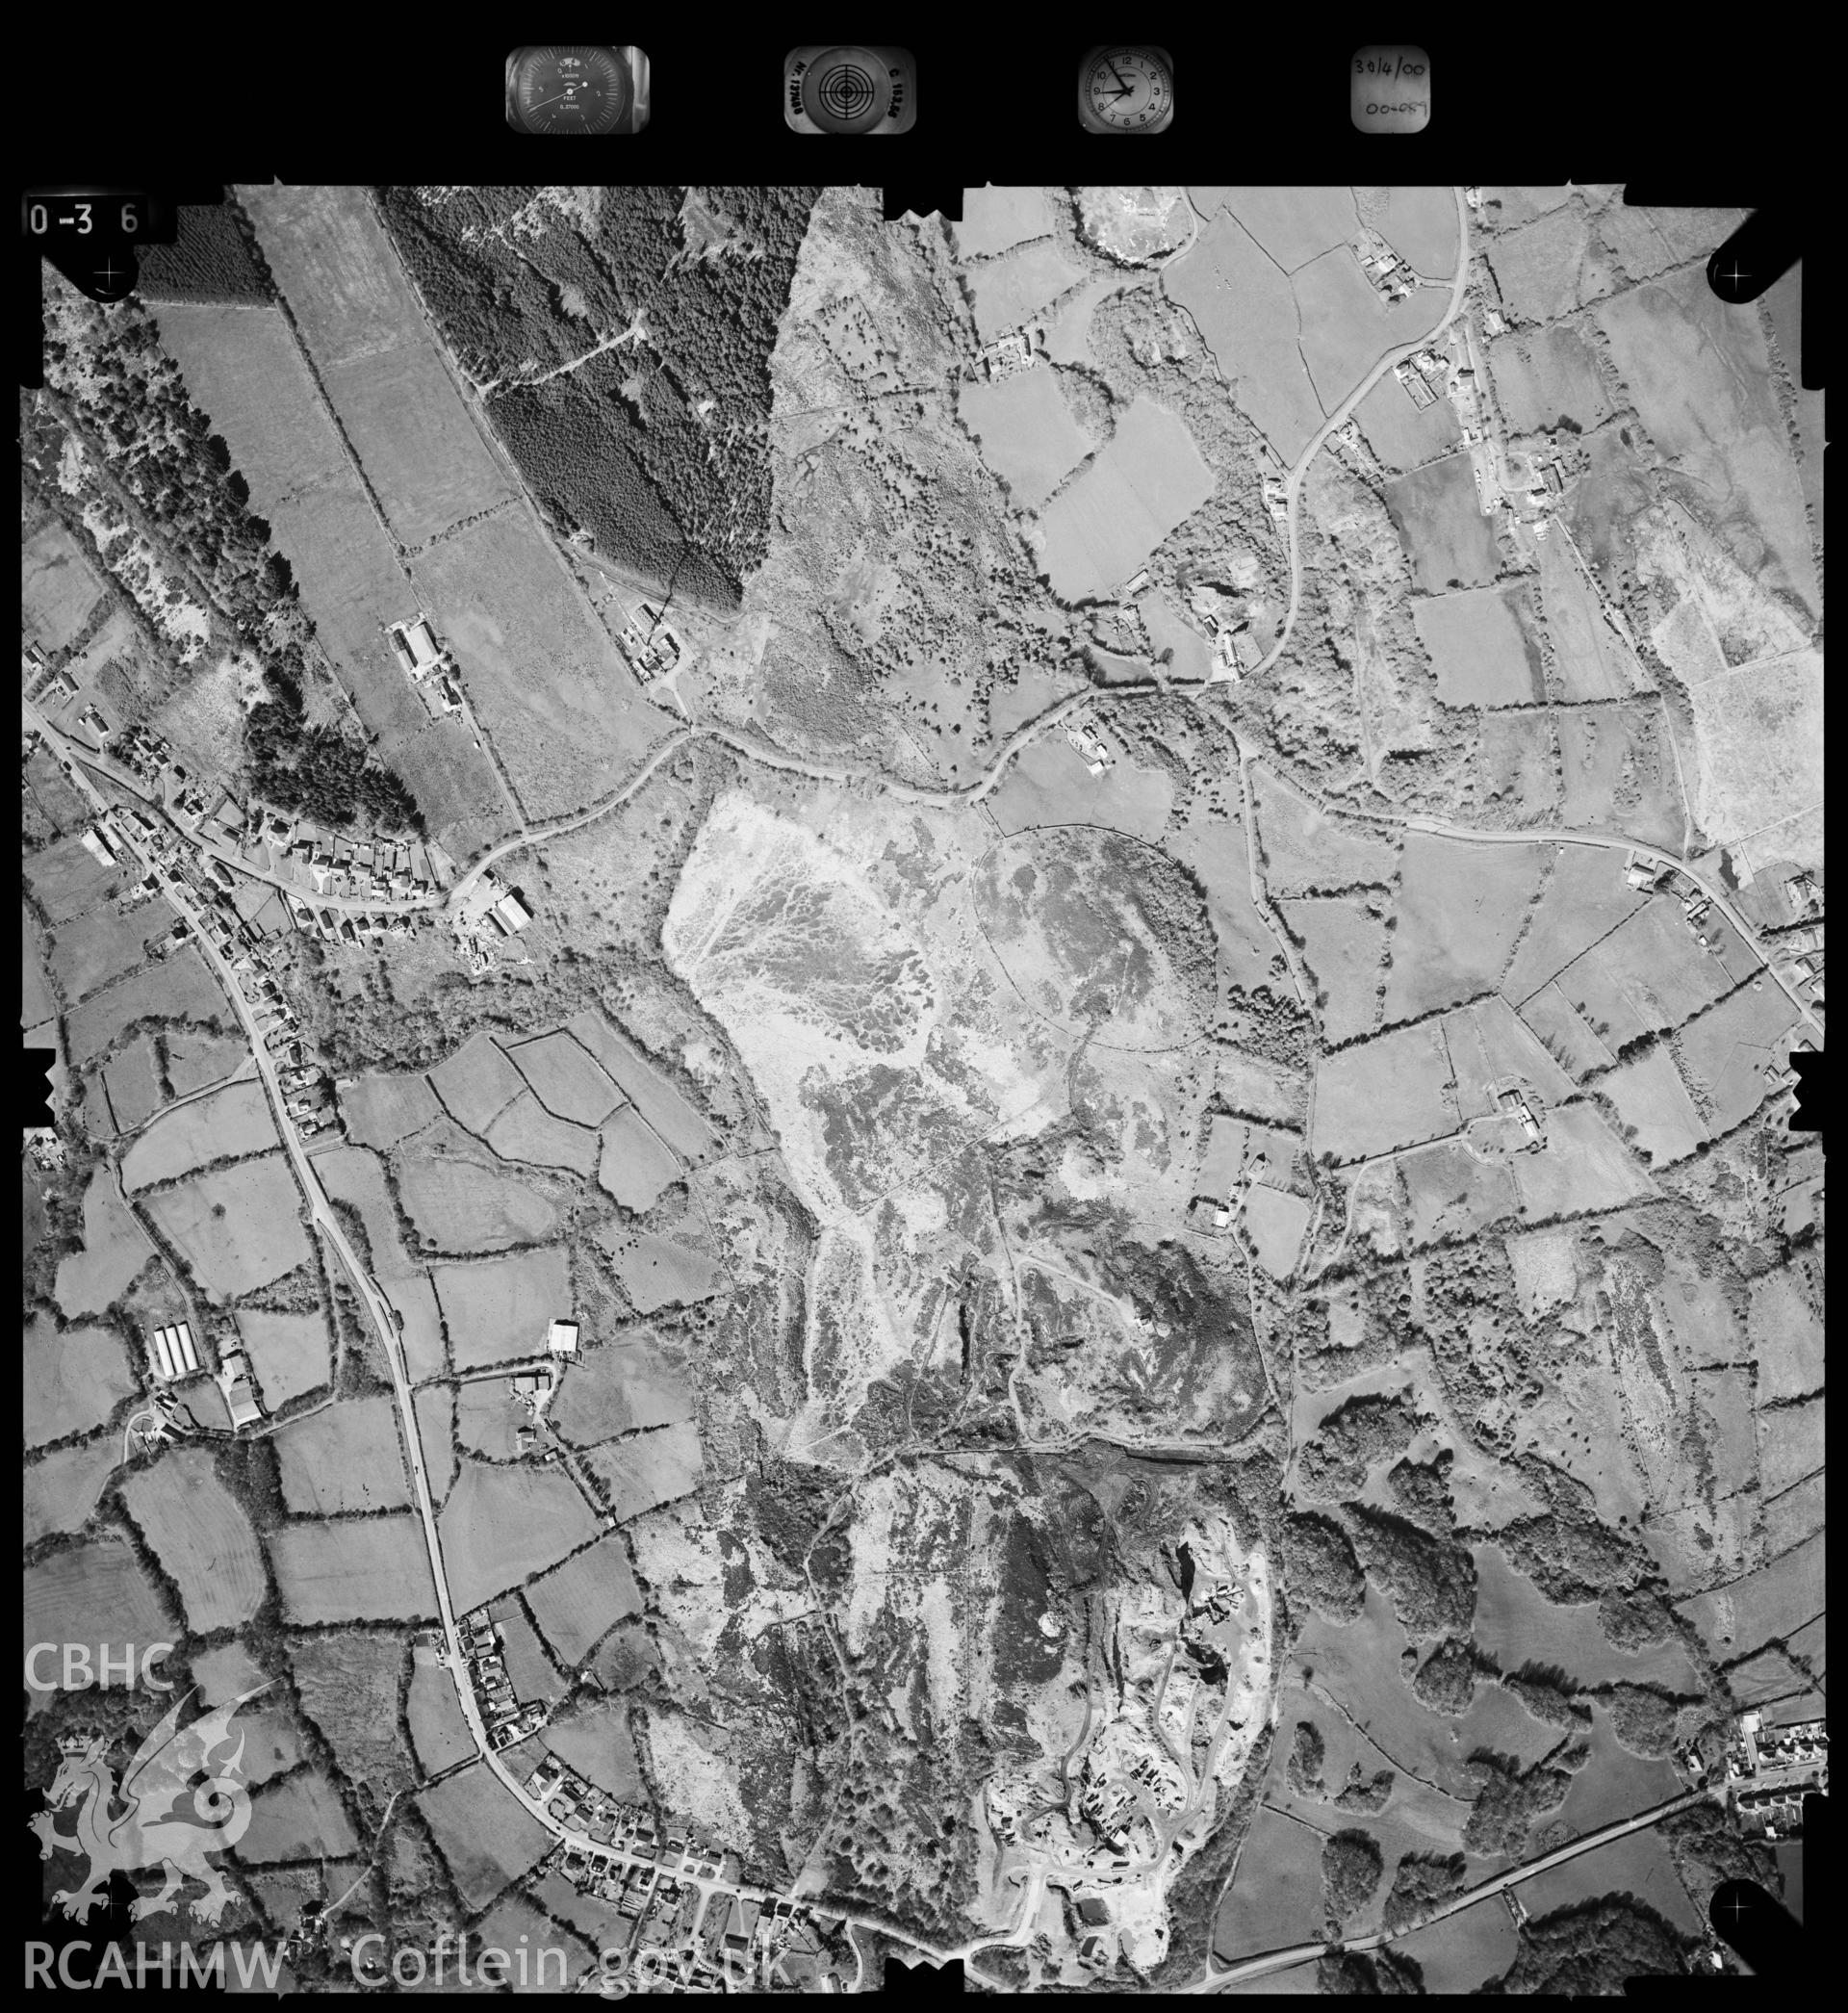 Digitized copy of an aerial photograph showing the Carmel area, taken by Ordnance Survey, 2000.